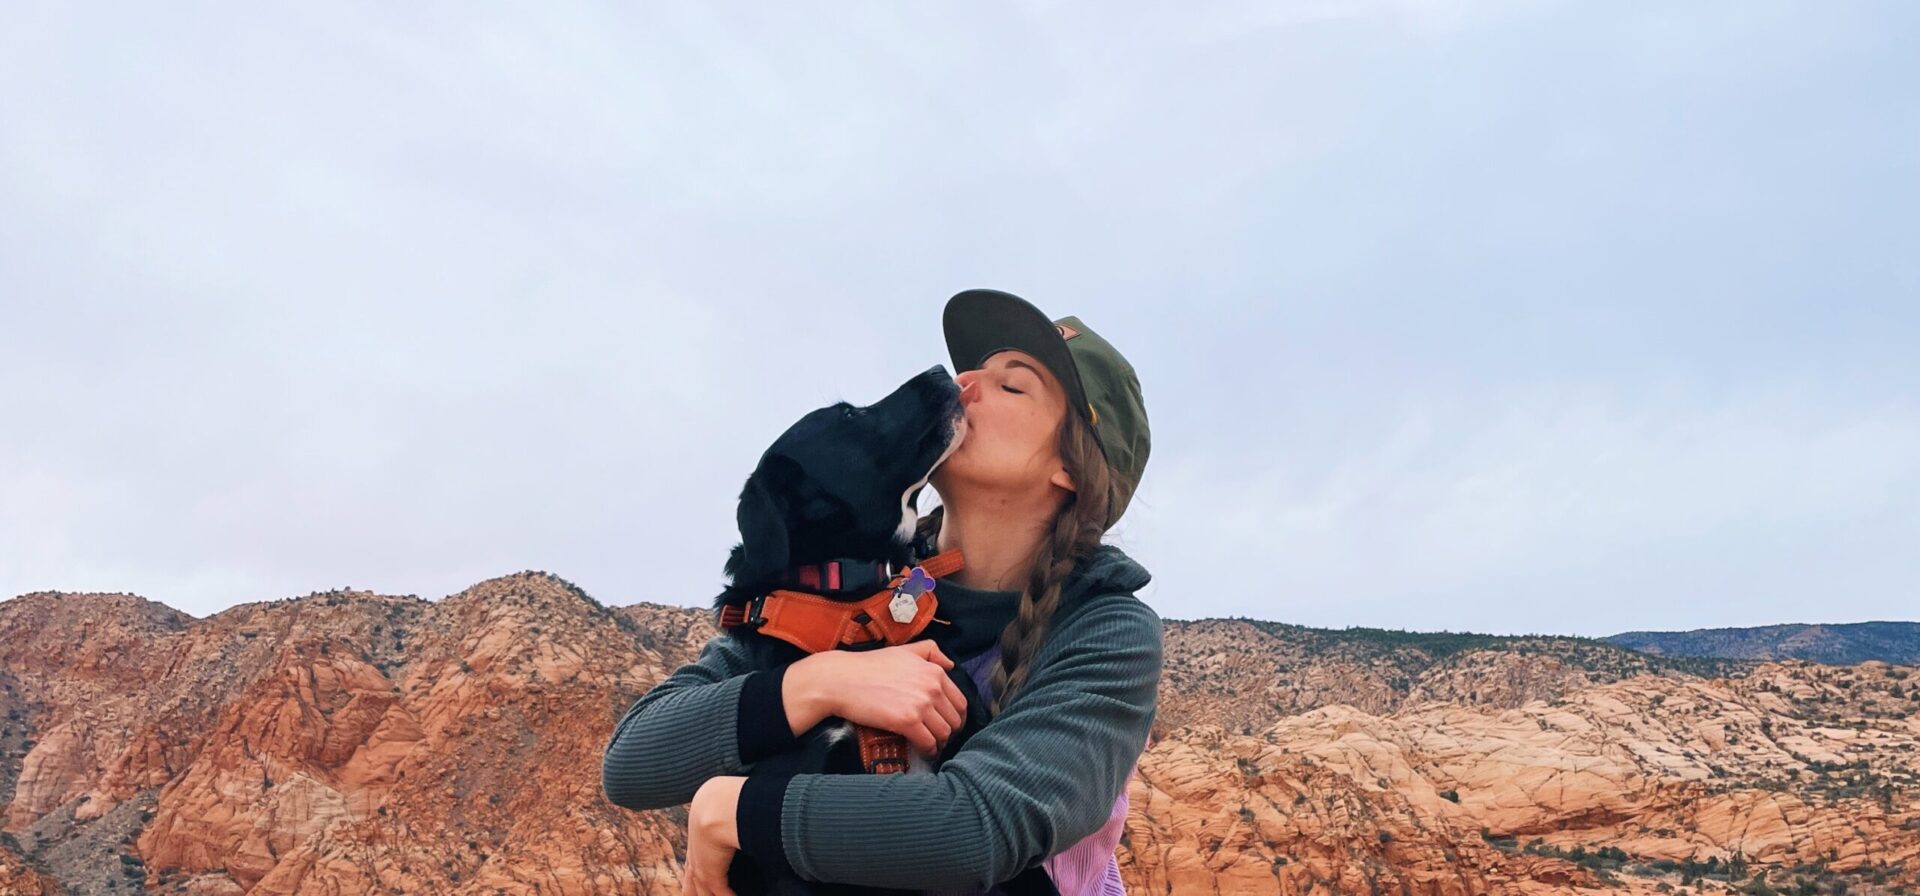 author with dog in utah